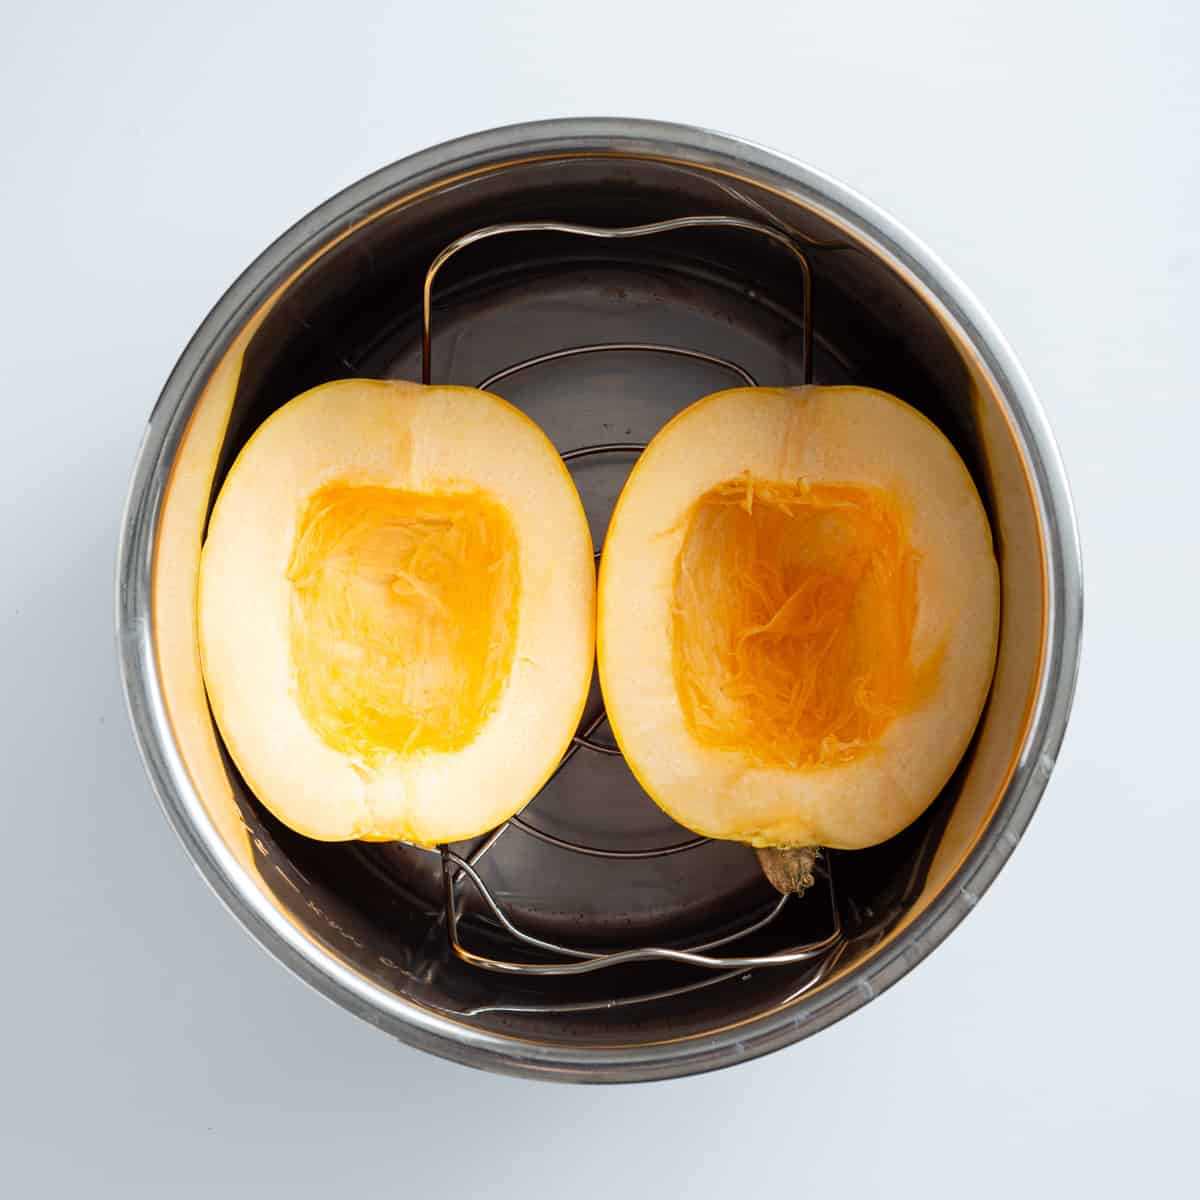 An overhead image of cooked spaghetti squash in an instant pot.